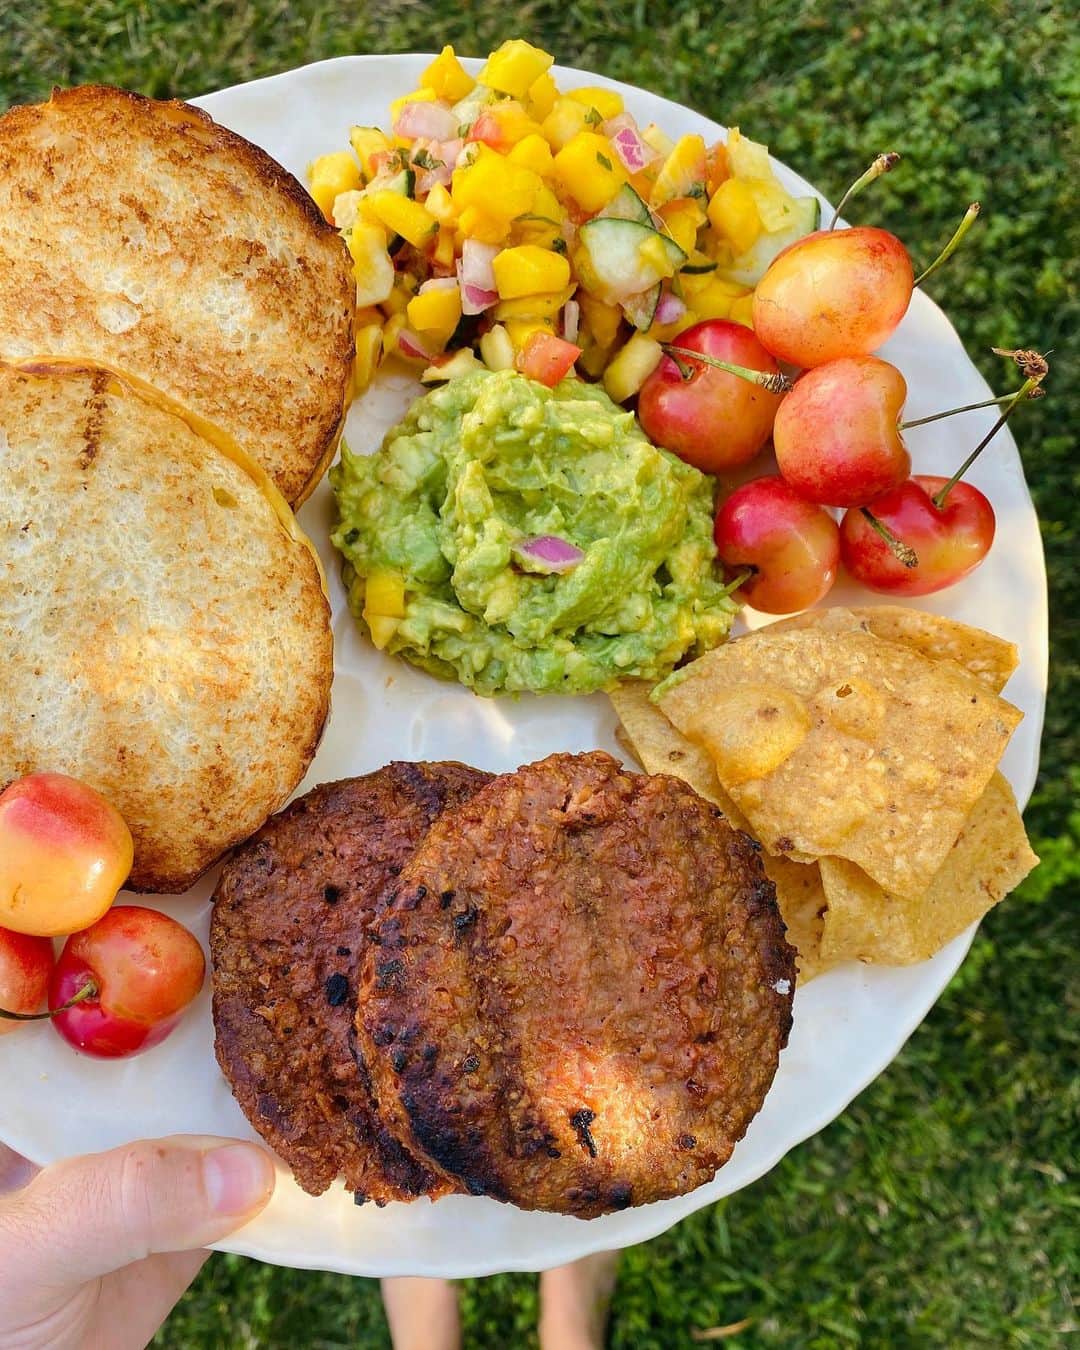 Gaby Dalkinさんのインスタグラム写真 - (Gaby DalkinInstagram)「Prepped and ready for an avocado / mango salsa plant-based burger kinda night #ad The new and improved @lightlifefoods Plant-Based Burgers (which we currently have fully stocked in the freezer) are exactly what the doctor ordered for a hot summer night!  They’re made with simple ingredients,  and they’re totally deliciously -  a dream burger! If you haven’t had them yet - get on it and get cooking! #Lightlife   Mango Salsa  1 ripe mango peeled, seeded, diced 2 tbsp finely chopped red onion 2 tbsp chopped cucumber 2-3 tbsp fresh lime juice 1 jalapeño, minced  Guac 2 ripe avocados 2 tbsp finely chopped red onion 3 tablespoons freshly chopped chives 1/2 lemon juiced 1/2 lime juiced 2 teaspoons finely chopped jalapeño Kosher salt and freshly cracked black pepper to taste  Burgers 1 package Lightlife Plant-Based Burgers Brioche Buns   Cook the Lightlife Plant-Based Burgers on a grill according to the package directions. Remove and toast the buns until lightly golden.  Mango Salsa  Combine the diced mango, onion, cucumber, lime juice and jalapeño in a medium bowl. Toss to combine and season with salt and pepper.  Guac Cut the avocados in half lengthwise. Remove the pit from the avocado and discard. Remove the avocado from the skin and place the avocado flesh into a bowl. Add the lemon juice, lime juice, red onion, chives, jalapeño, salt and pepper. Mash with a fork until half smooth and creamy. Taste and add more salt and pepper if desired. Serve everything together and enjoy!」7月10日 10時02分 - whatsgabycookin